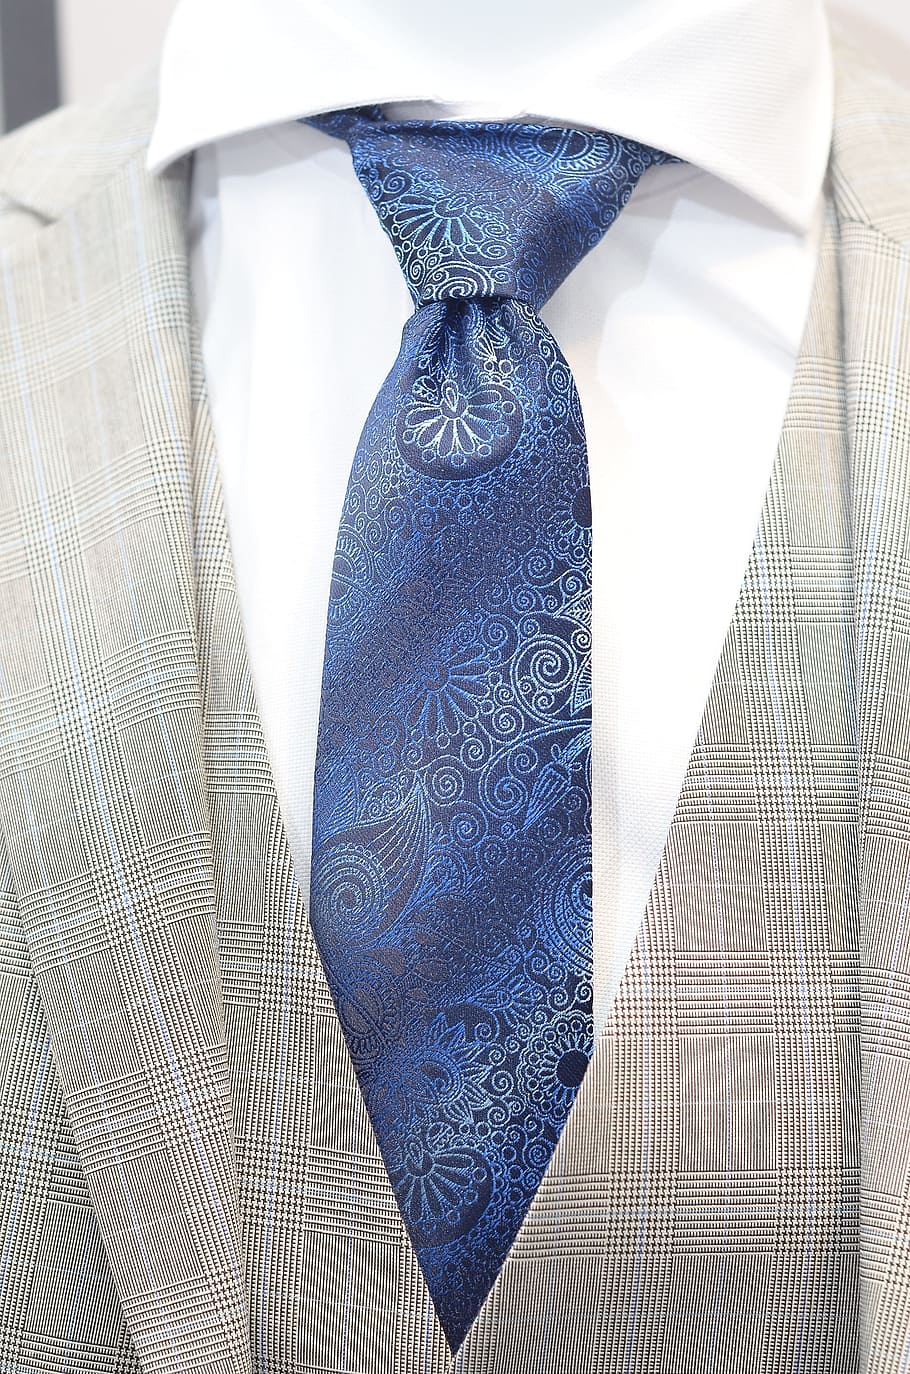 suit, tie, men, clothing, textile, menswear, fashion, well-dressed, business, formalwear